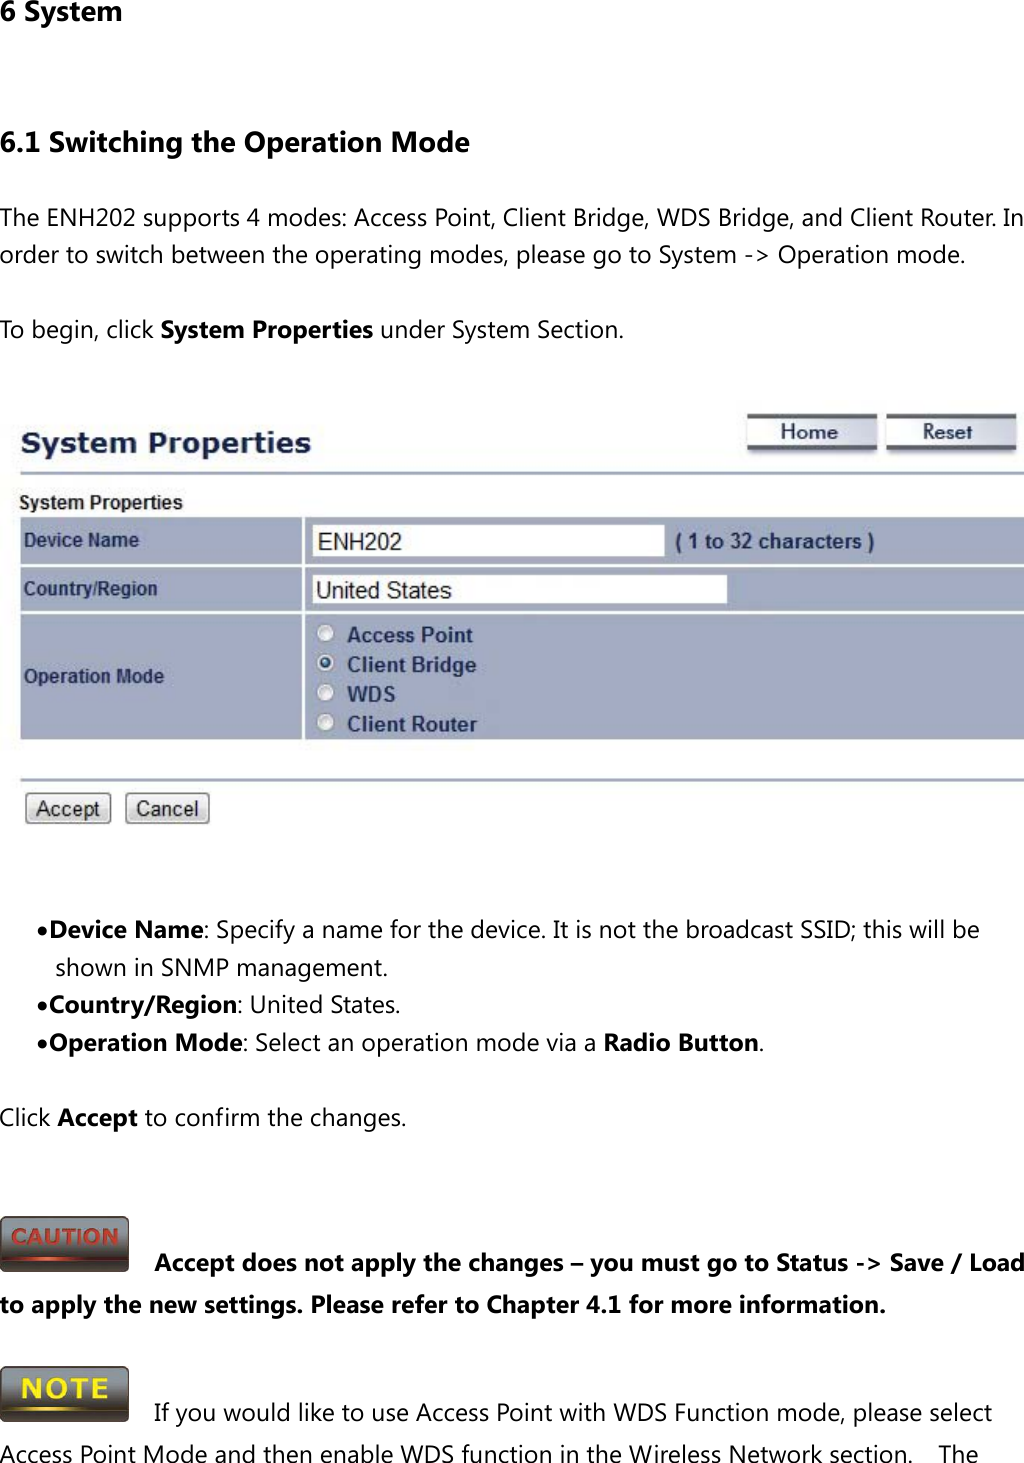 6 System 6.1 Switching the Operation Mode The ENH202 supports 4 modes: Access Point, Client Bridge, WDS Bridge, and Client Router. In order to switch between the operating modes, please go to System -&gt; Operation mode.  To begin, click System Properties under System Section.   • Device Name: Specify a name for the device. It is not the broadcast SSID; this will be shown in SNMP management. • Country/Region: United States. • Operation Mode: Select an operation mode via a Radio Button.  Click Accept to confirm the changes.     Accept does not apply the changes – you must go to Status -&gt; Save / Load to apply the new settings. Please refer to Chapter 4.1 for more information.    If you would like to use Access Point with WDS Function mode, please select Access Point Mode and then enable WDS function in the Wireless Network section.  The 